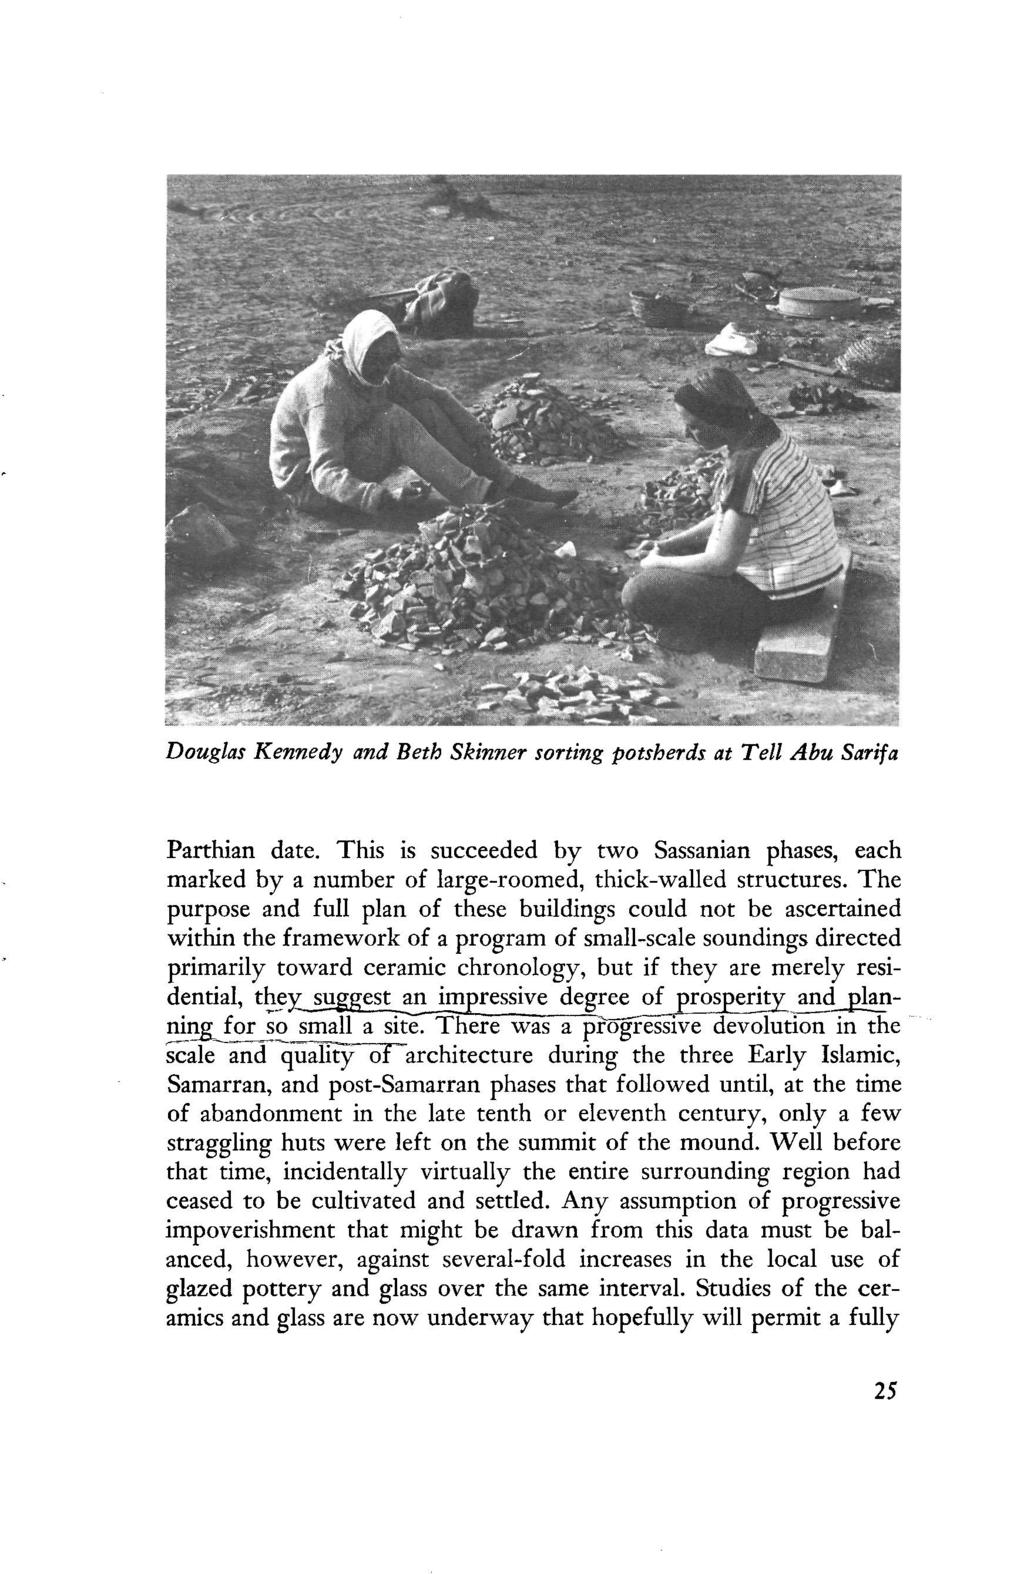 Douglas Kennedy and Beth Skinner sorting potsherds at Tell Abu Sarifa Parthian date. This is succeeded by two Sassanian phases, each marked by a number of large-roomed, thick-walled structures.